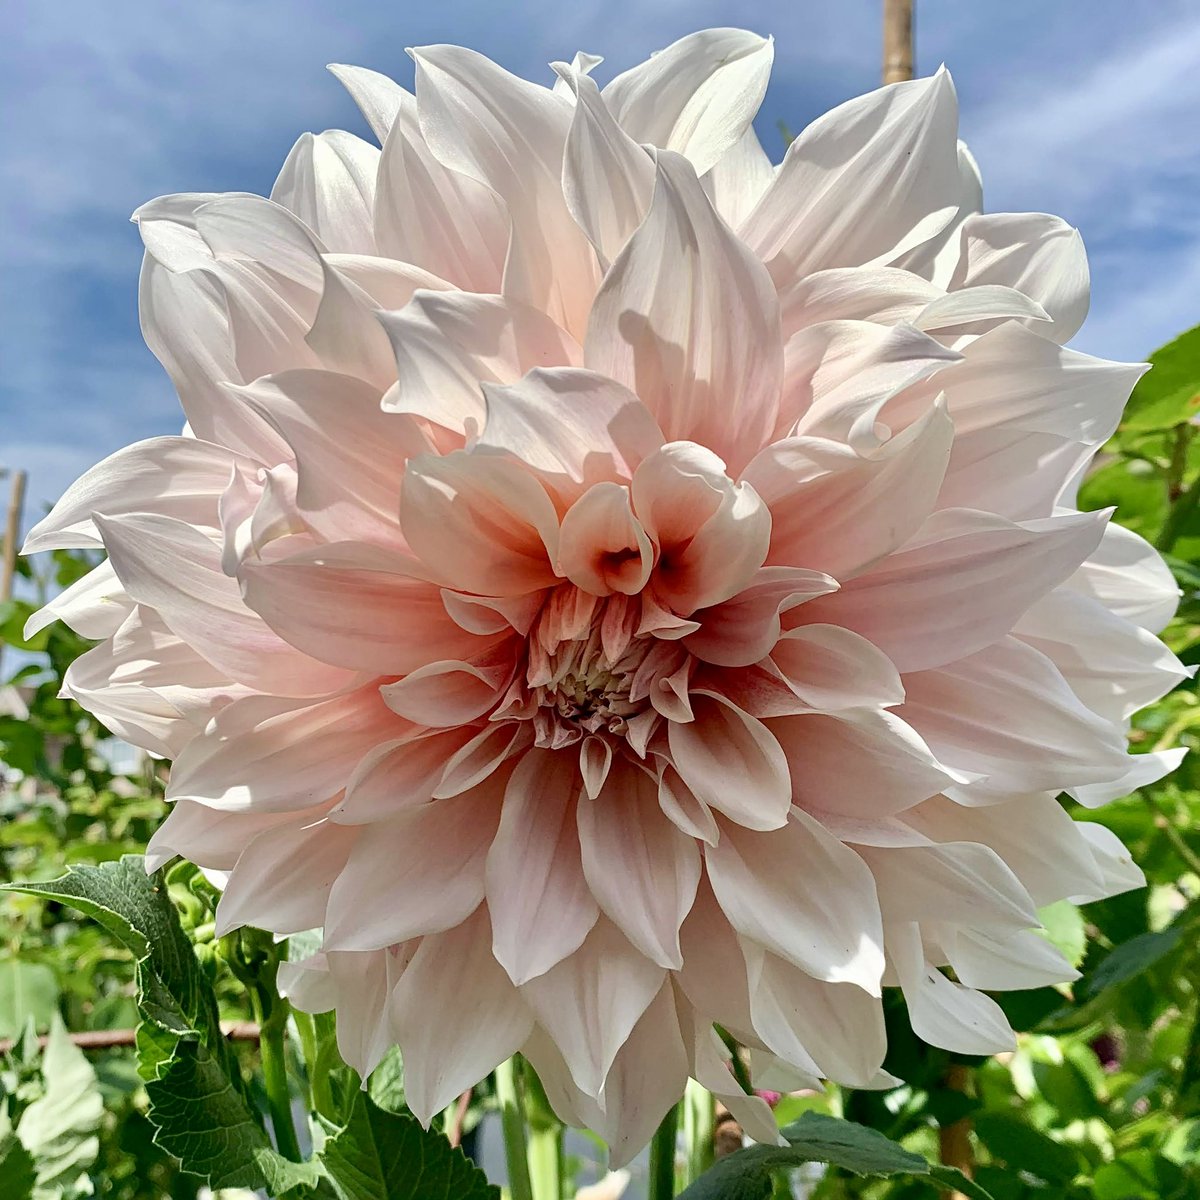 Time for a celebration 🥳 I can see the 'Cafe au Lait’ dahlias have made it though 🤍🌸#Flowers #Gardening #Dahlias